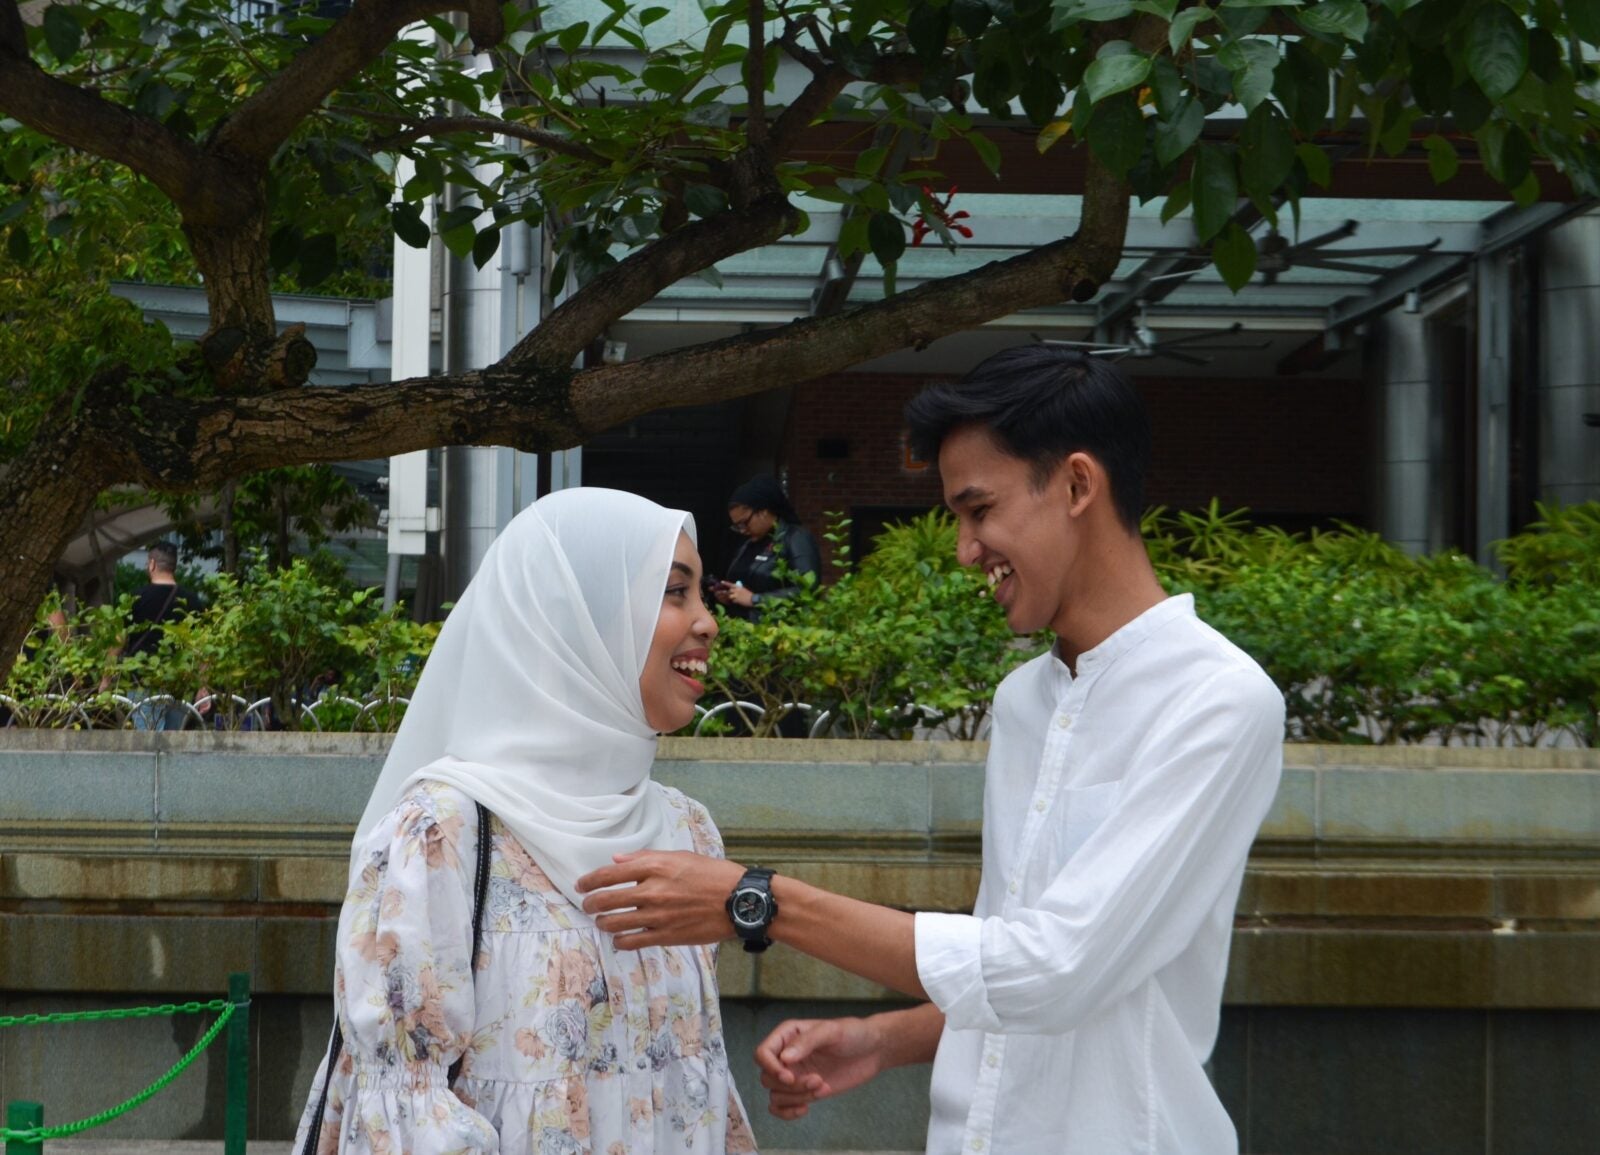 A Malay couple standing close together as the boyfriend fixes the girlfriend's hijab at KLCC park